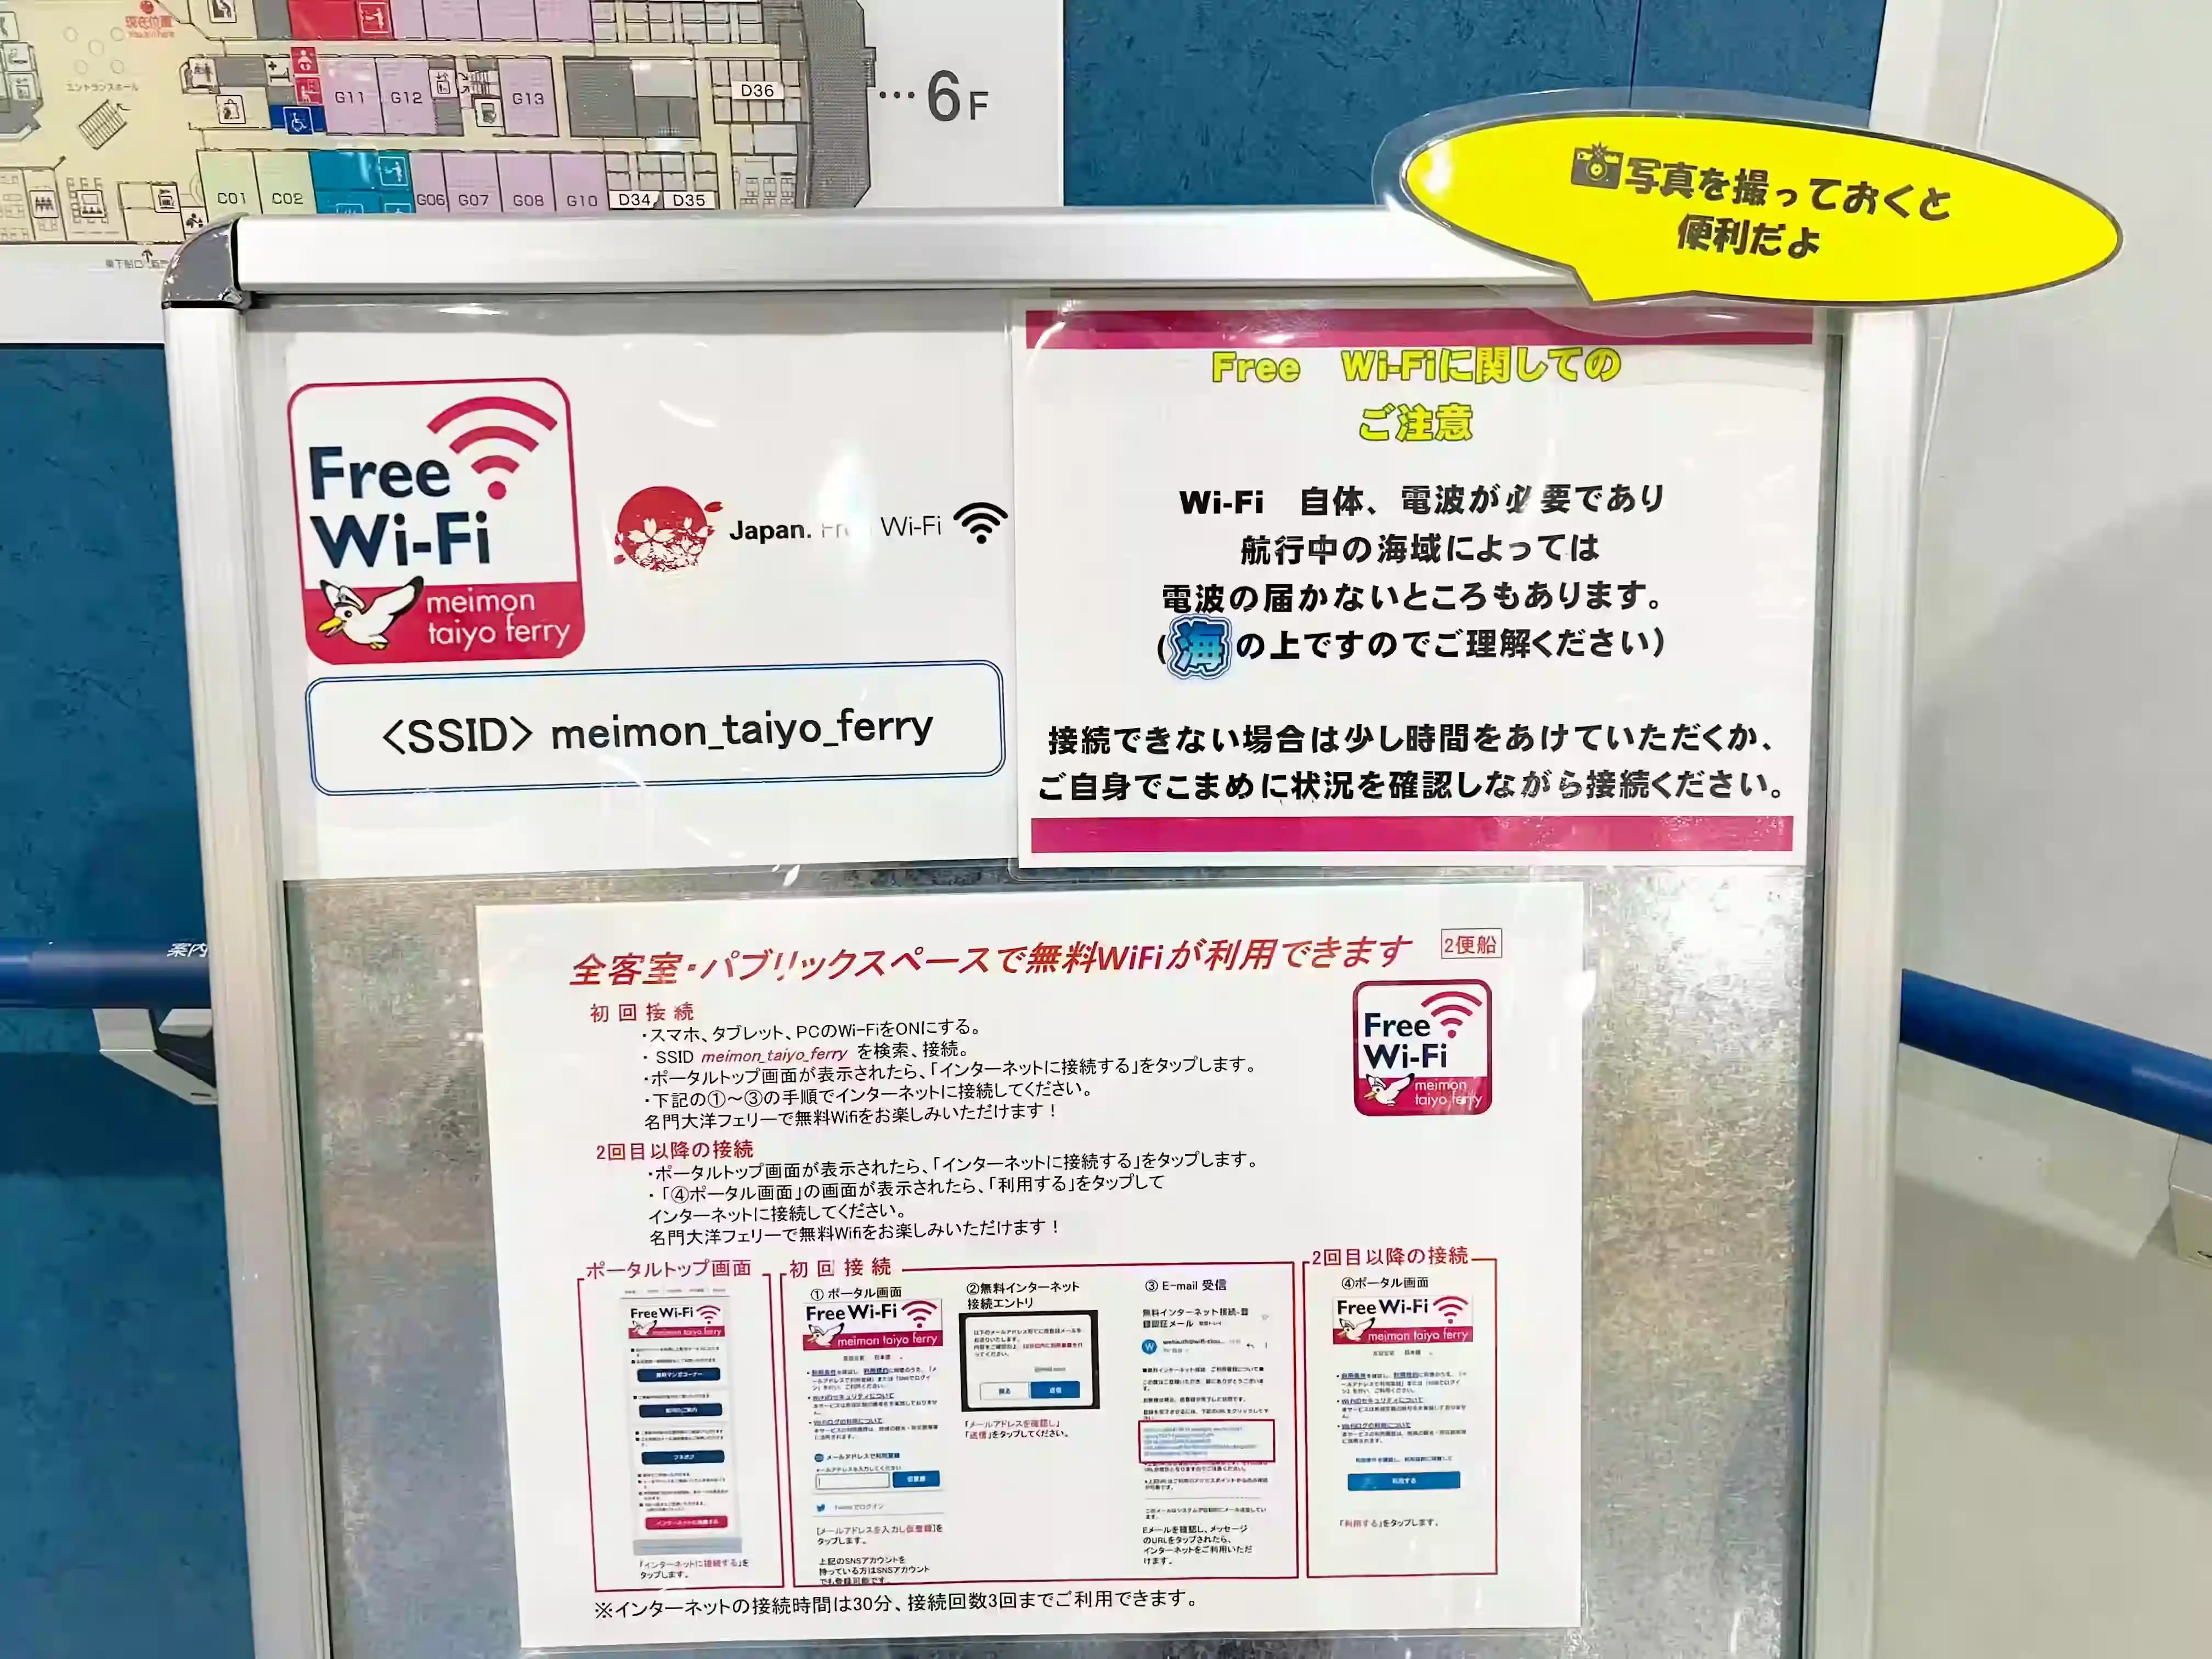 A paper with instructions on how to use the free Wi-Fi on board the Meimon Taiyo Ferry Osaka 2.